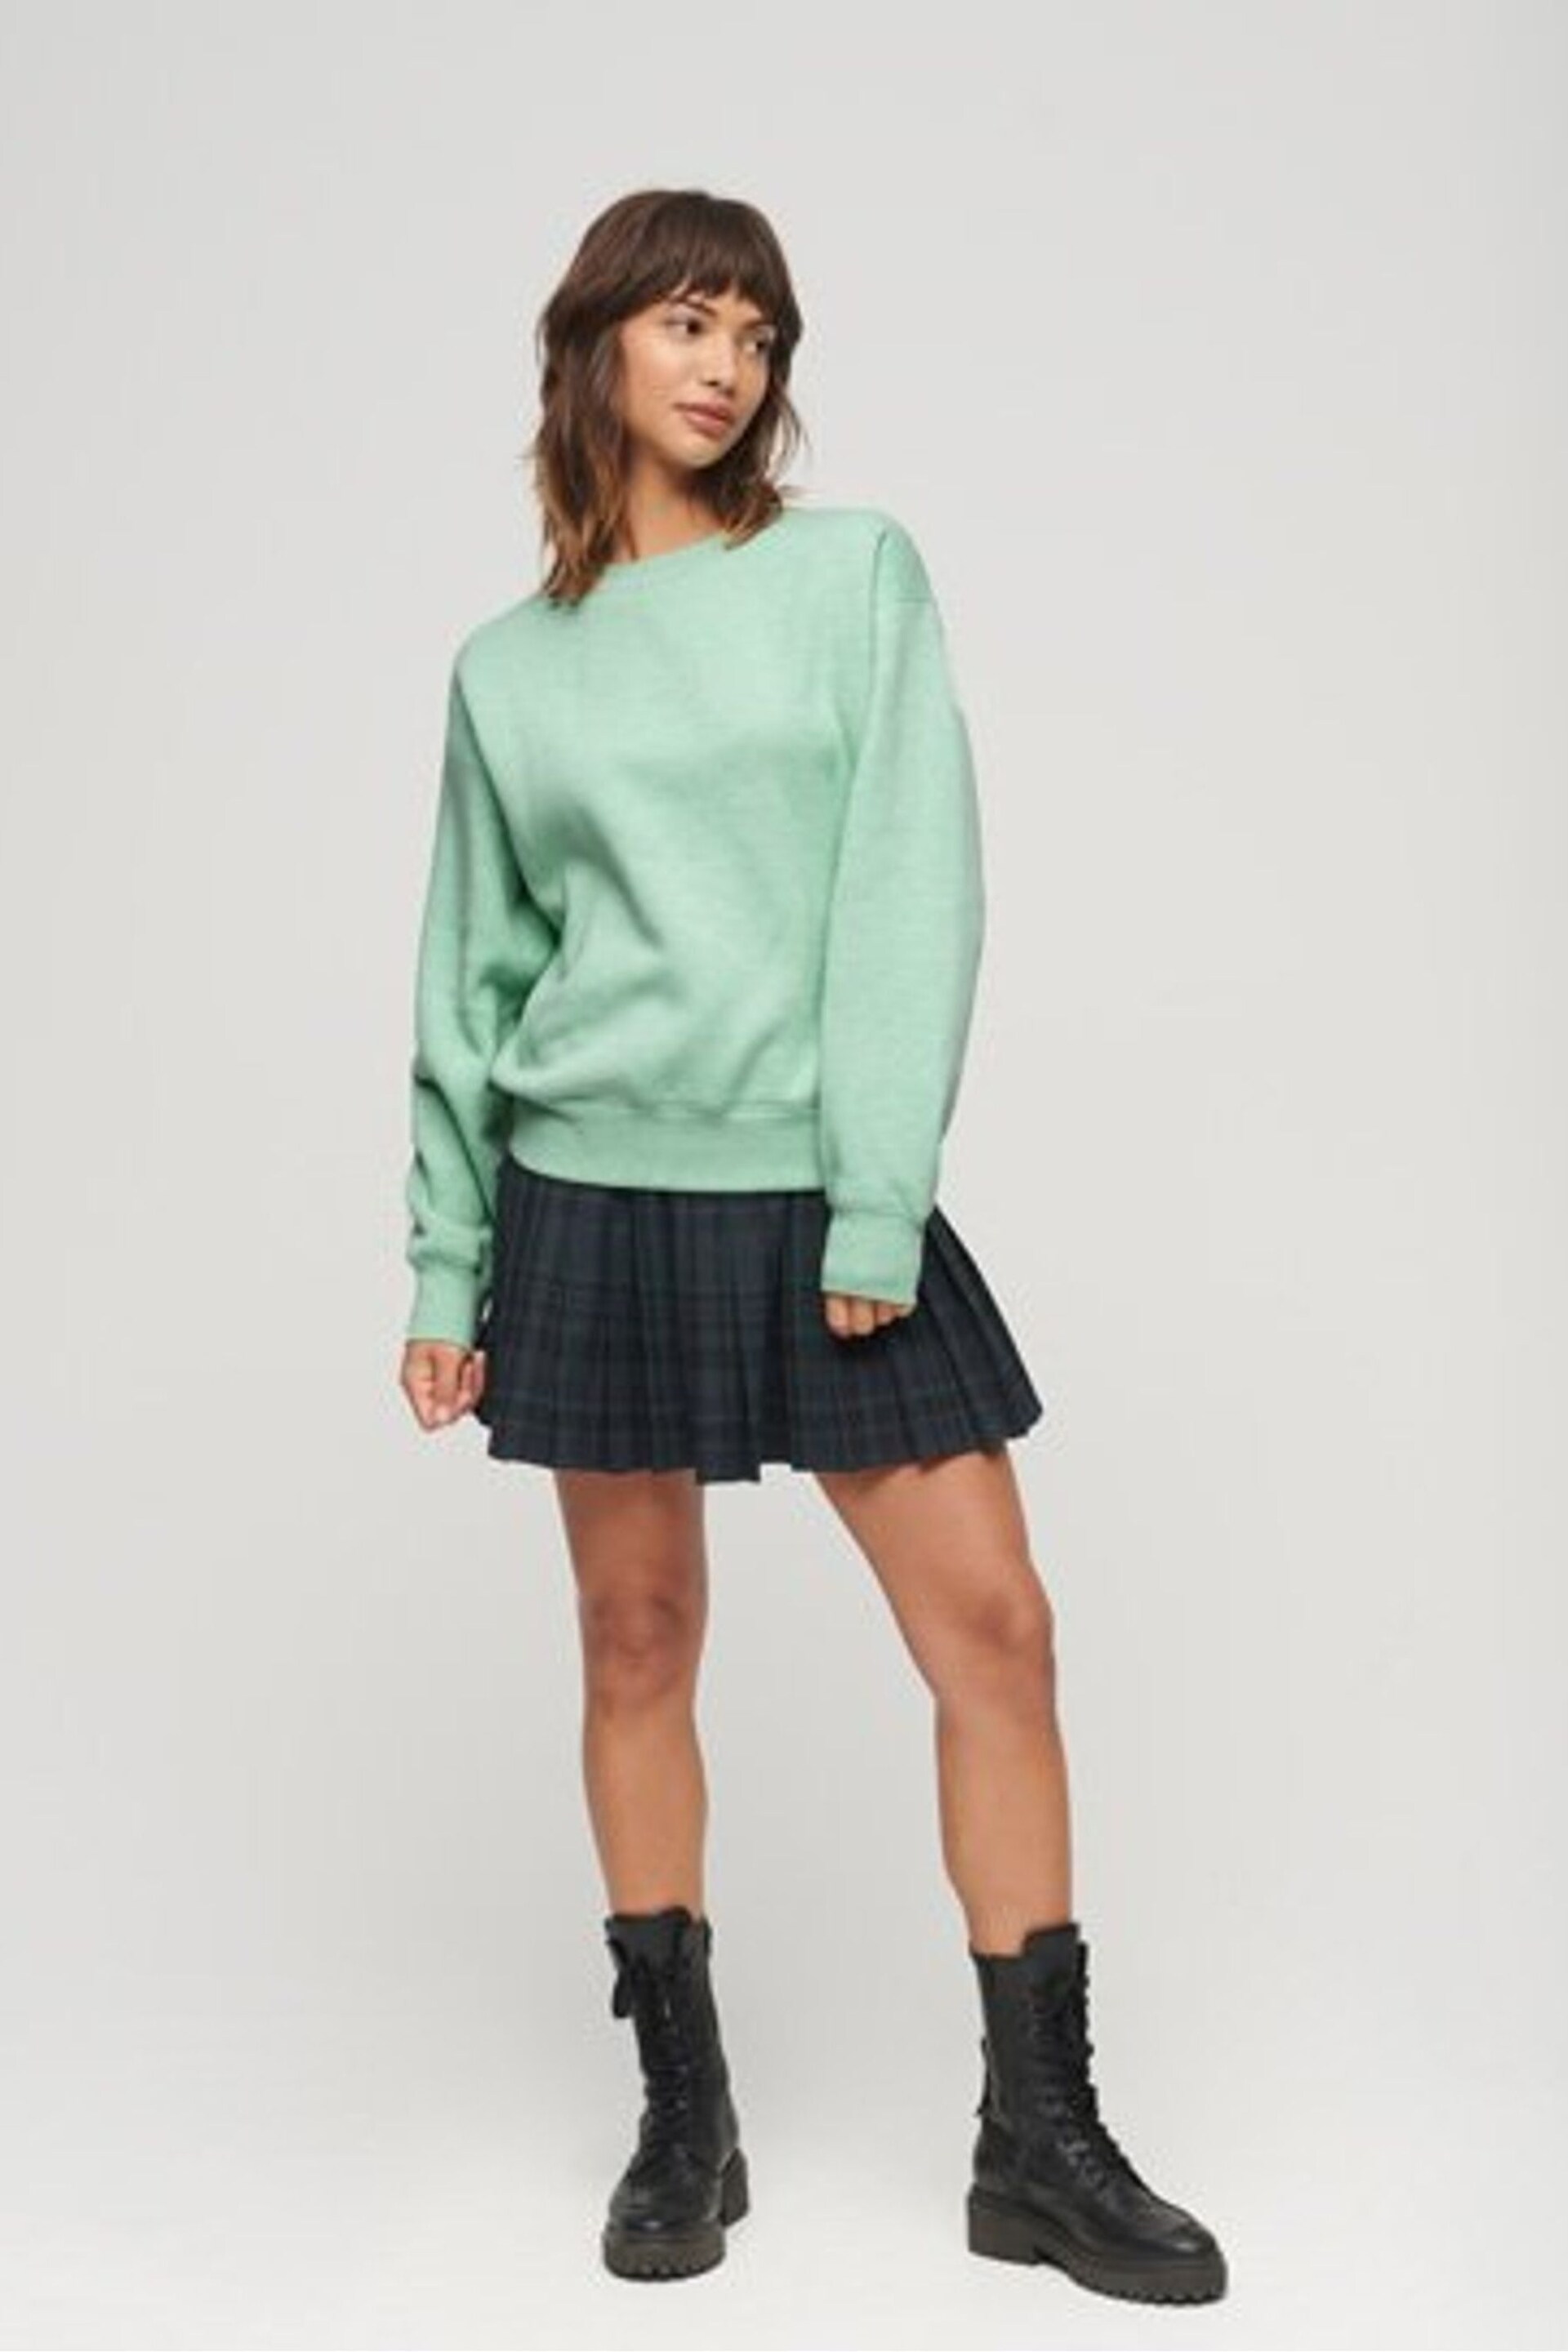 Superdry Green Essential Logo Relaxed Fit Sweatshirt - Image 2 of 4